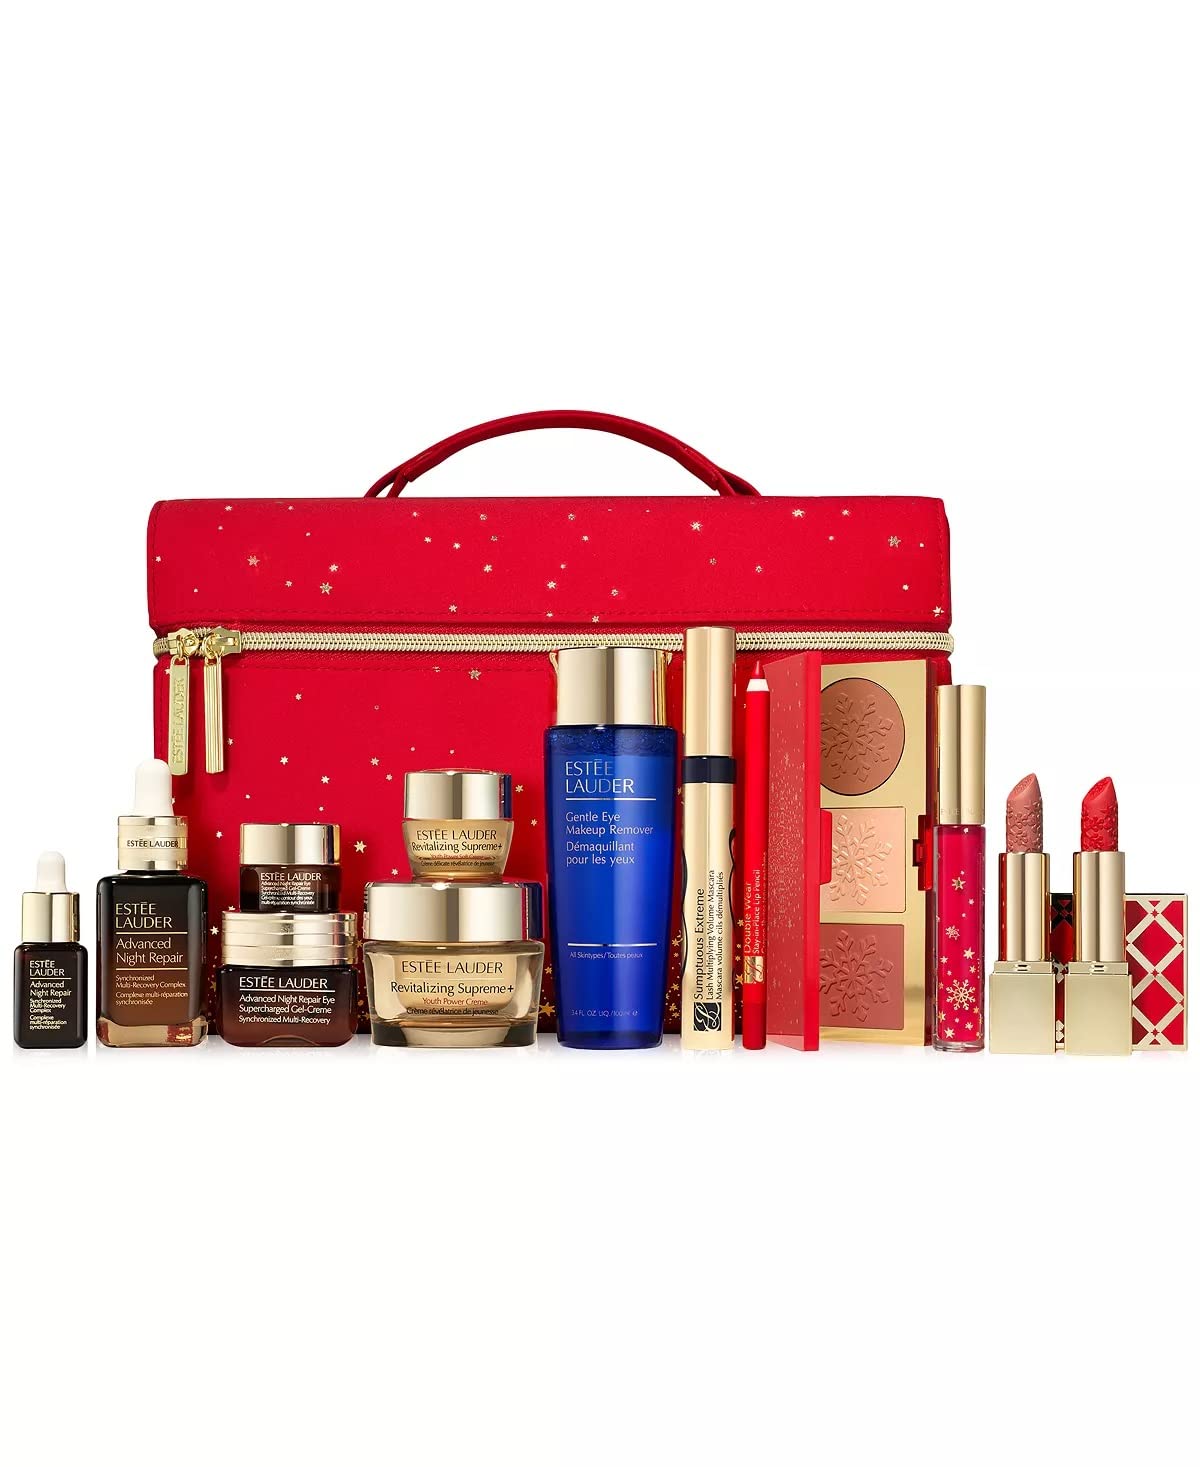 ESTÉE LAUDER LIMITED EDITION! The Ultimate Beauty Gift: Includes 10 FULL-SIZE Favorites. Choose yours for only $79 with any Estée Lauder Purchase (A $570 Value!)